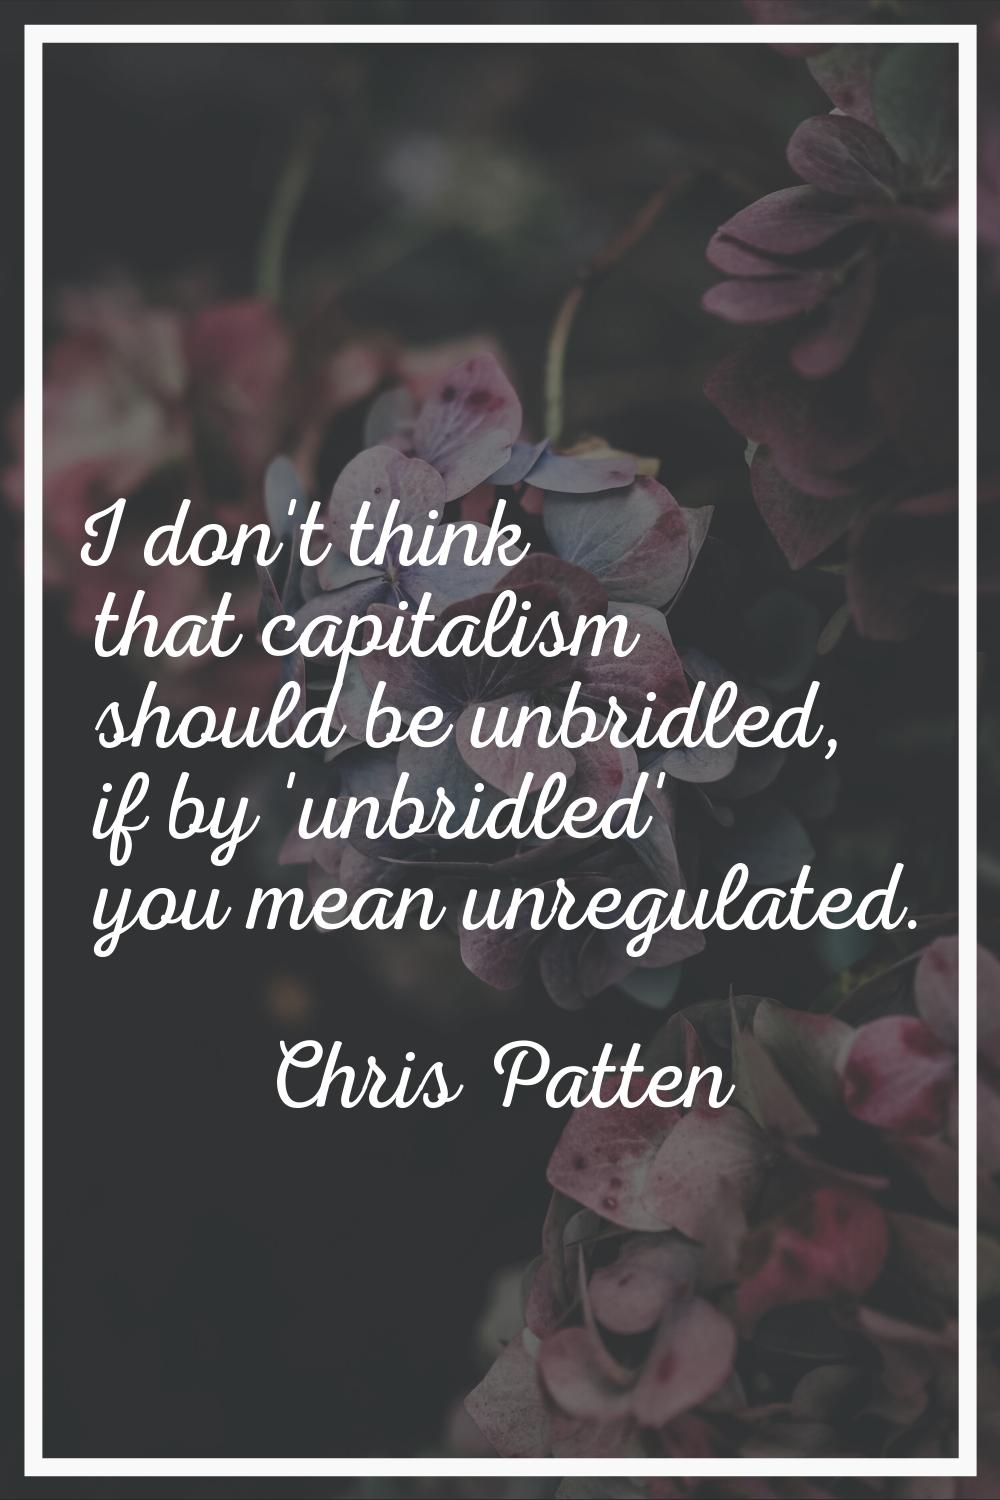 I don't think that capitalism should be unbridled, if by 'unbridled' you mean unregulated.